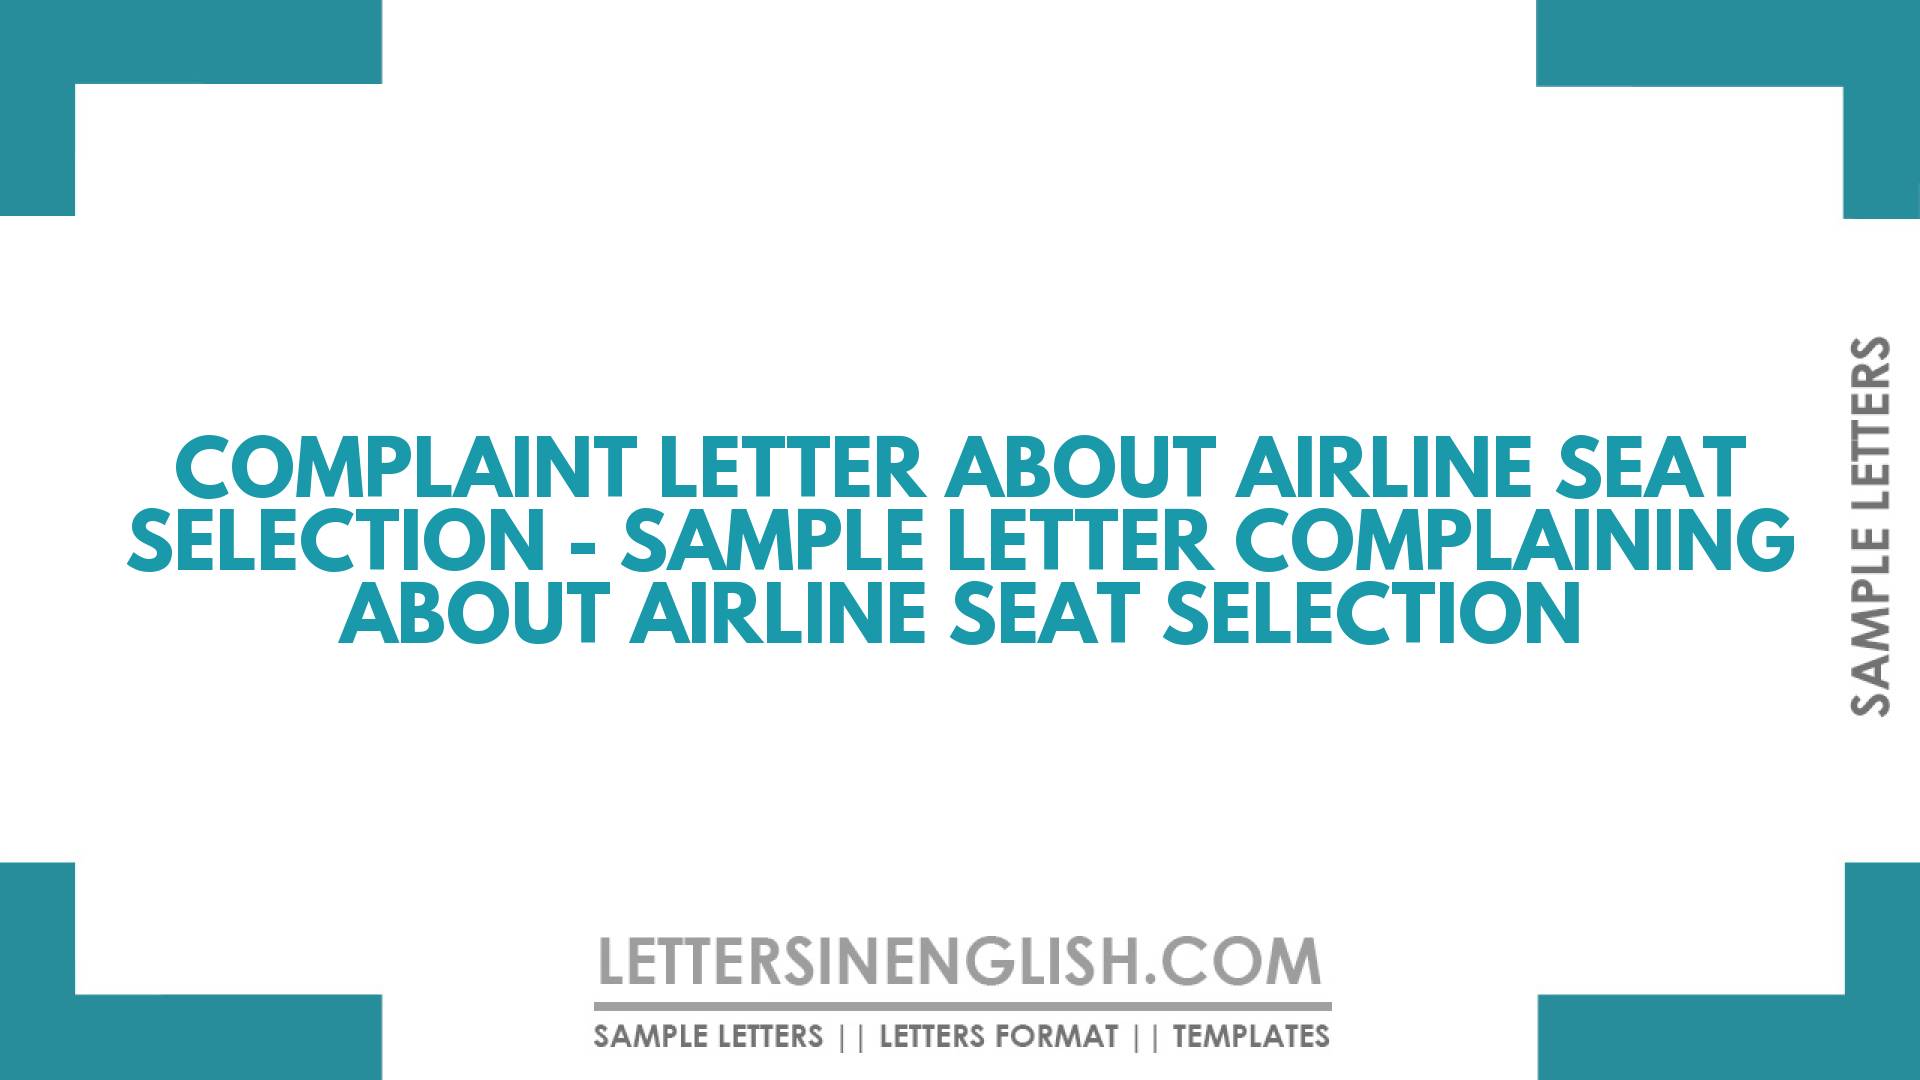 Complaint Letter About Airline Seat Selection – Sample Letter Complaining About Airline Seat Selection